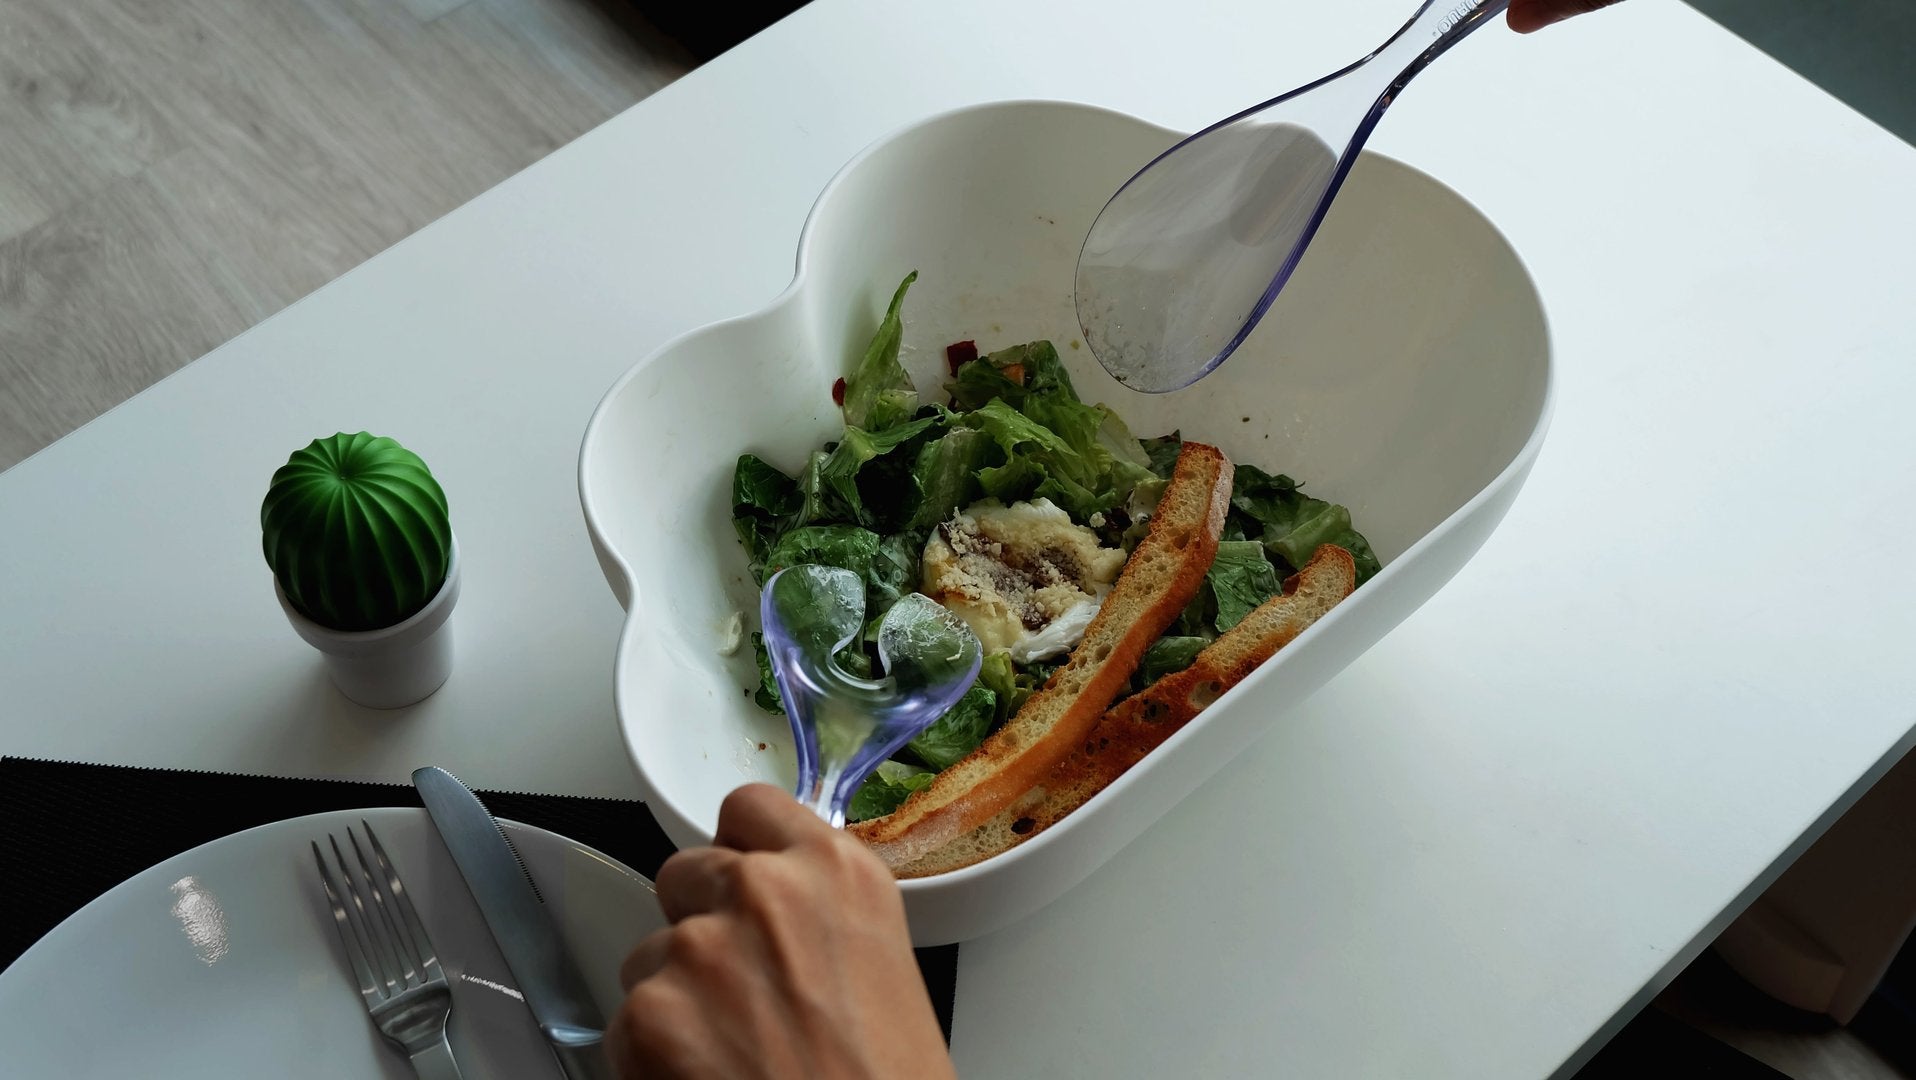 "Cloud" salad bowl from Qualy with salad servers